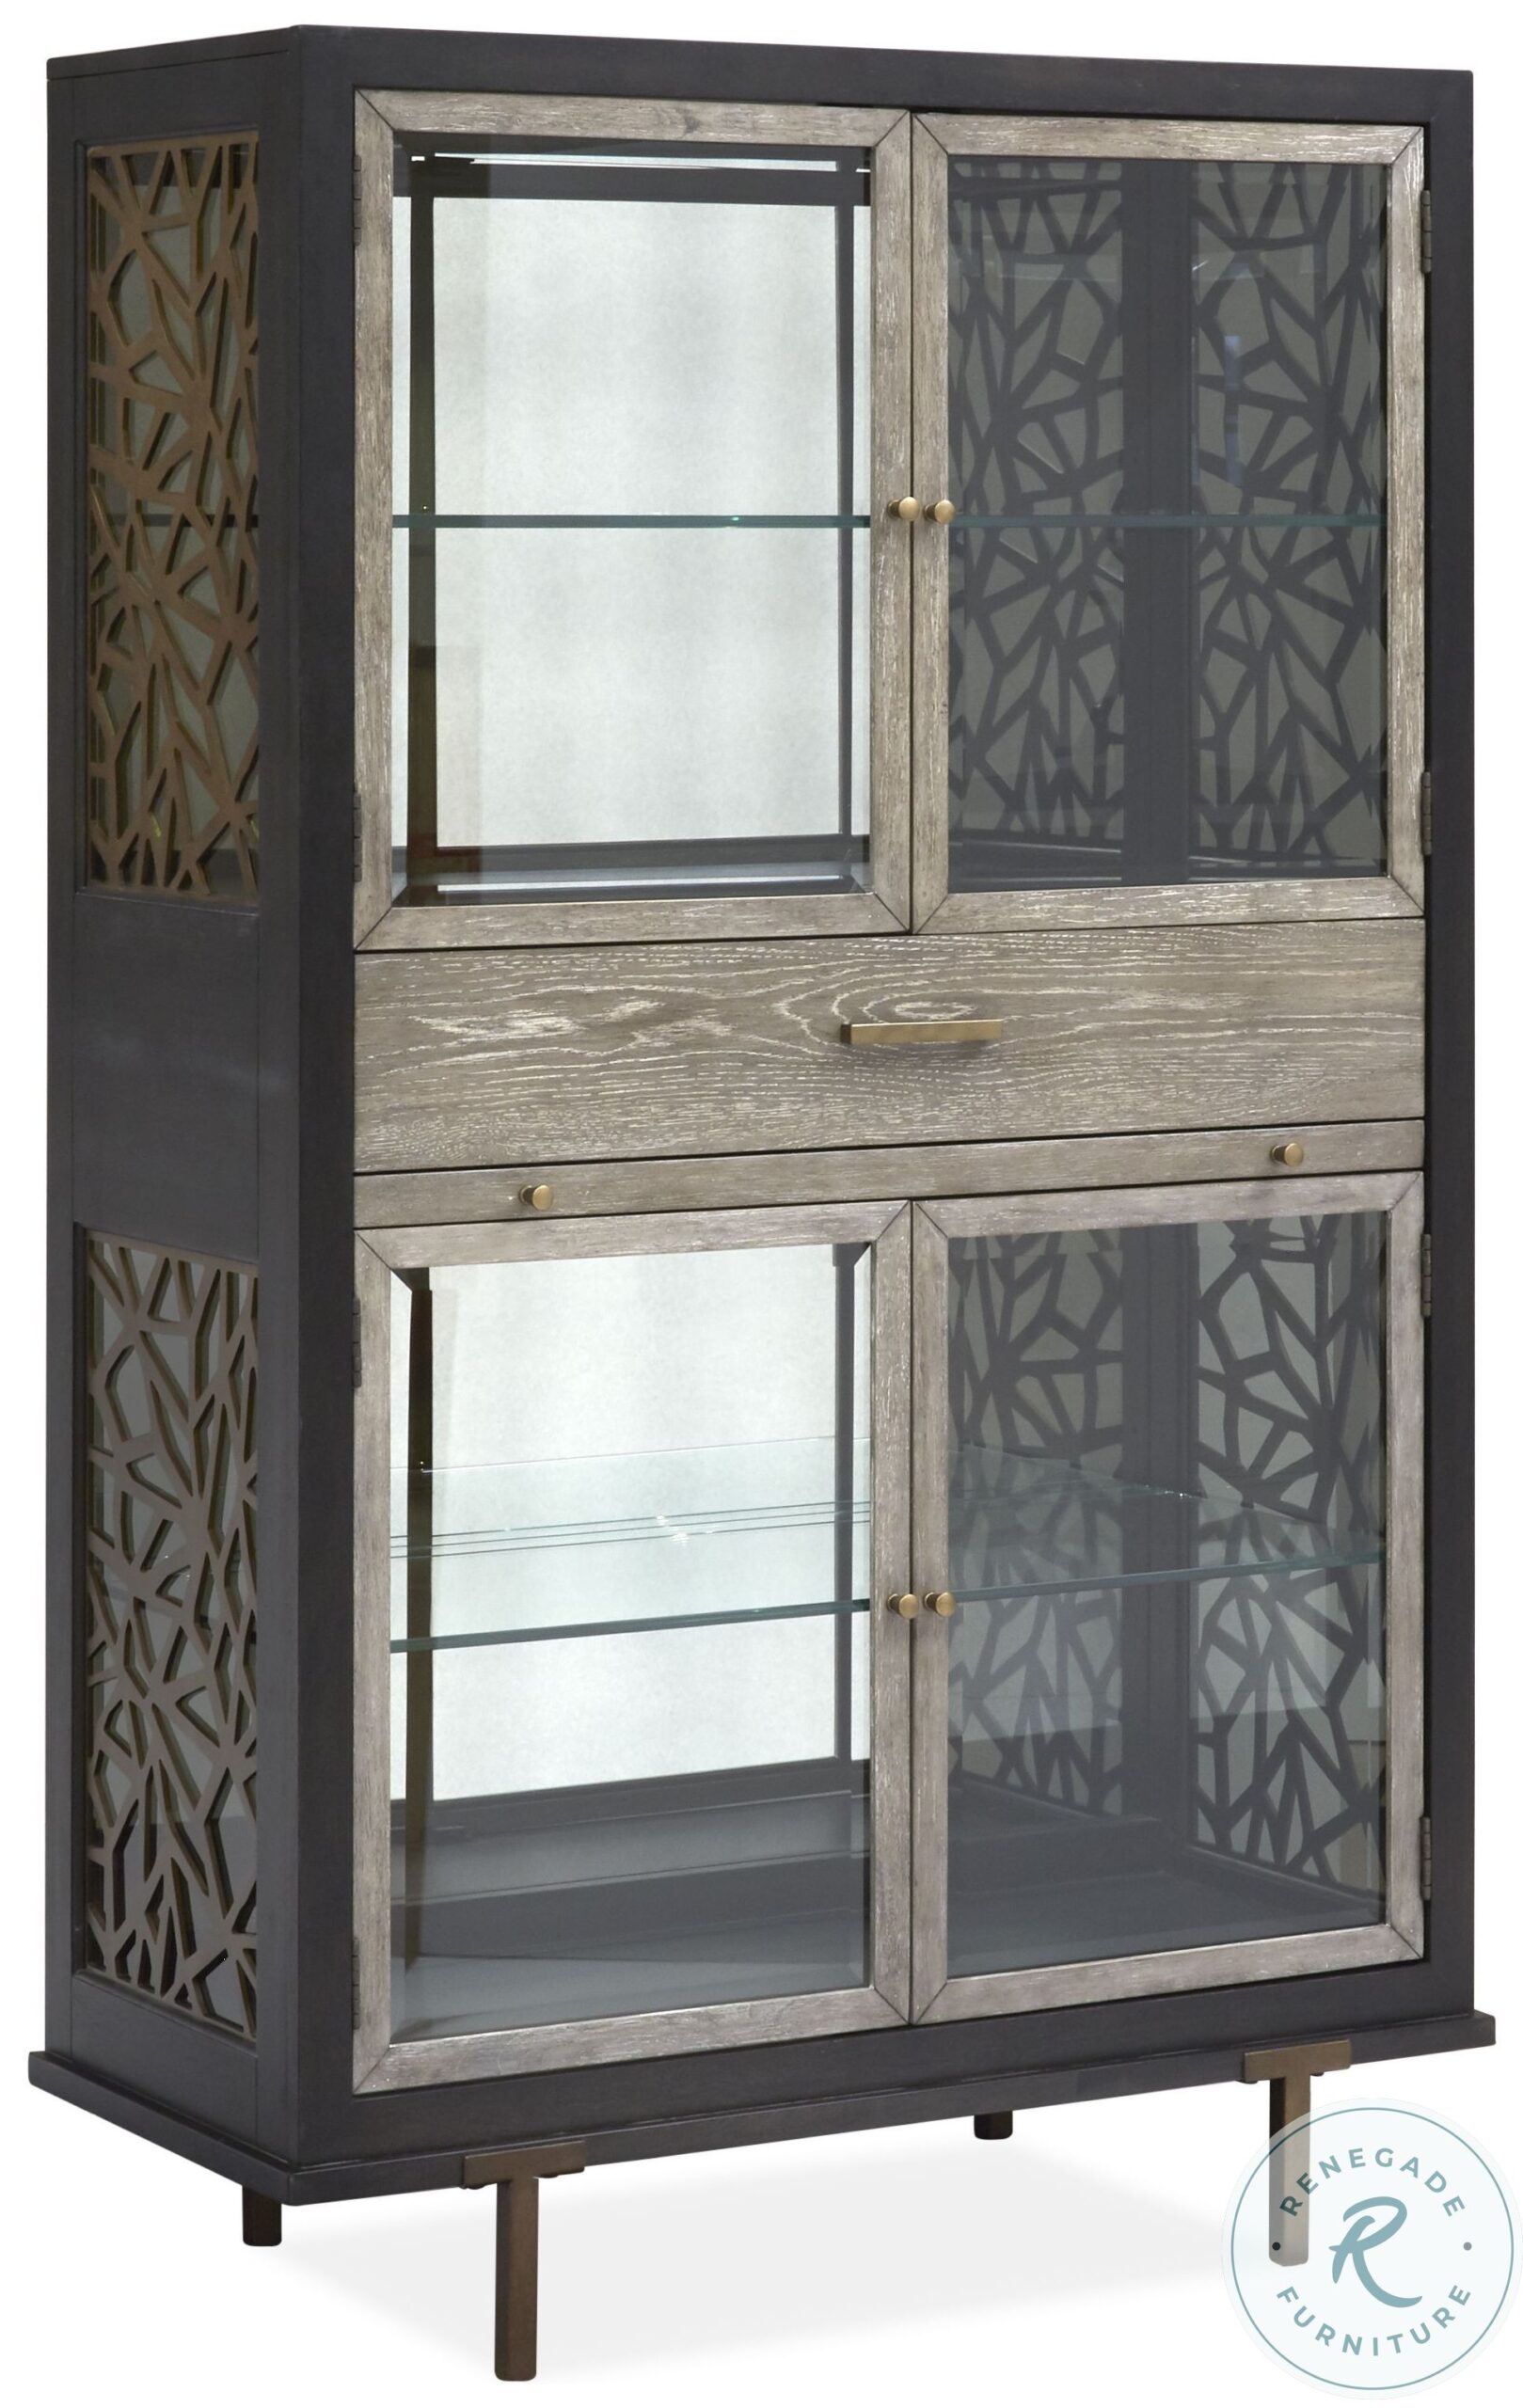 Ryker Nocturne Black And Coventry Grey Display Cabinet1 scaled